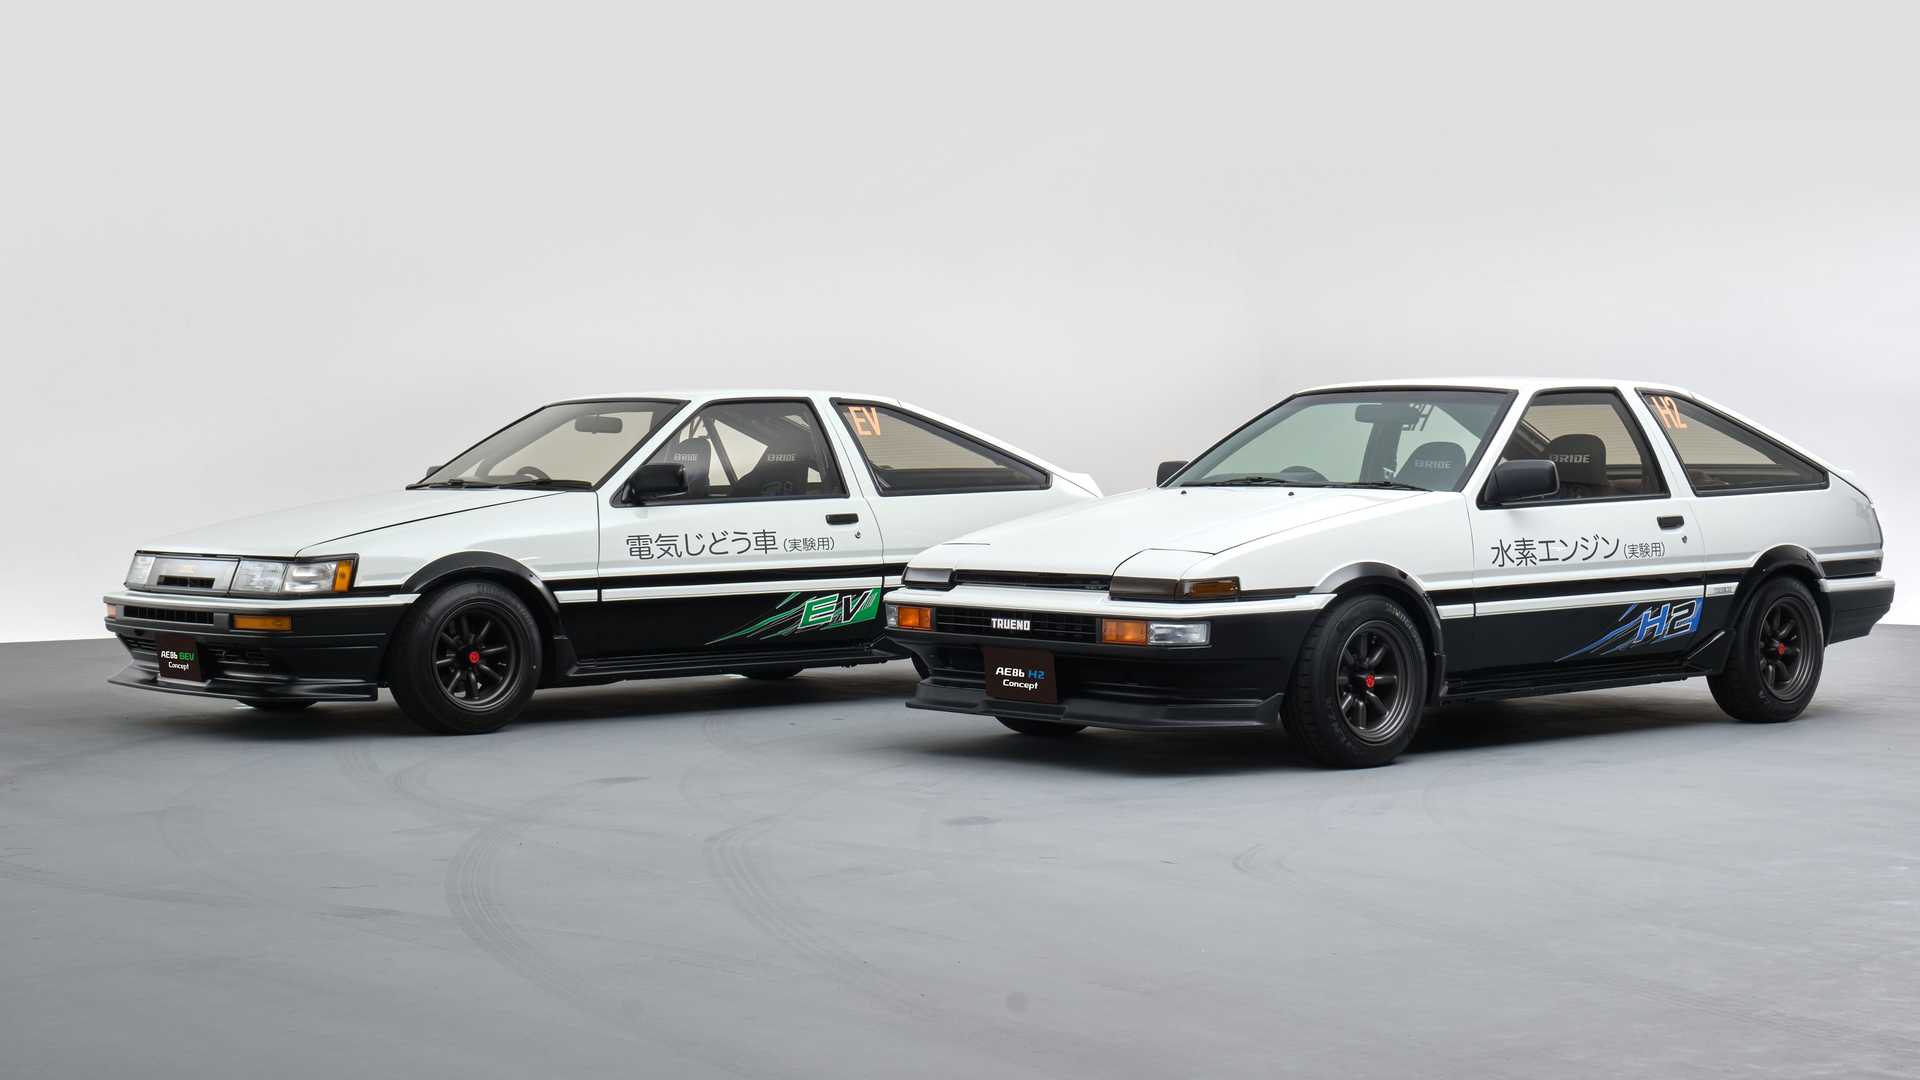 Toyota AE86 H2 and AE86 BEV concepts